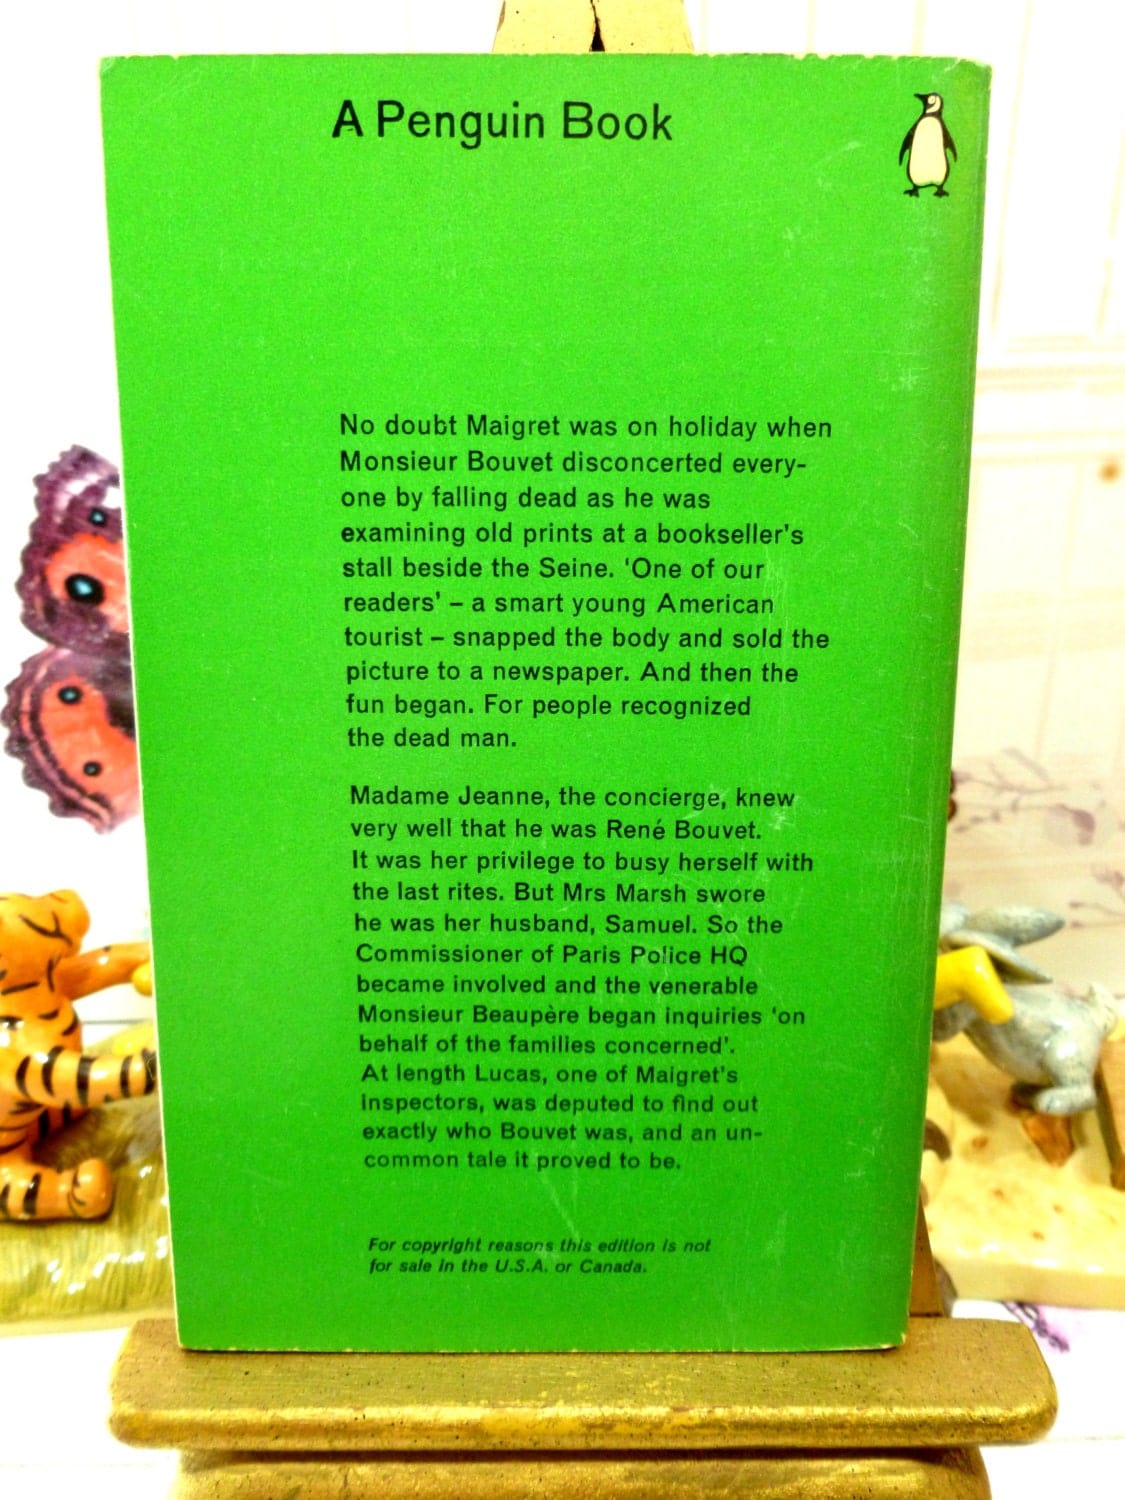 Back cover of Vintage Penguin Paperback book Inspector Maigret Inquest on Bouvet by Georges Simenon Crime Fiction with blurb on green ground with Penguin logo. 